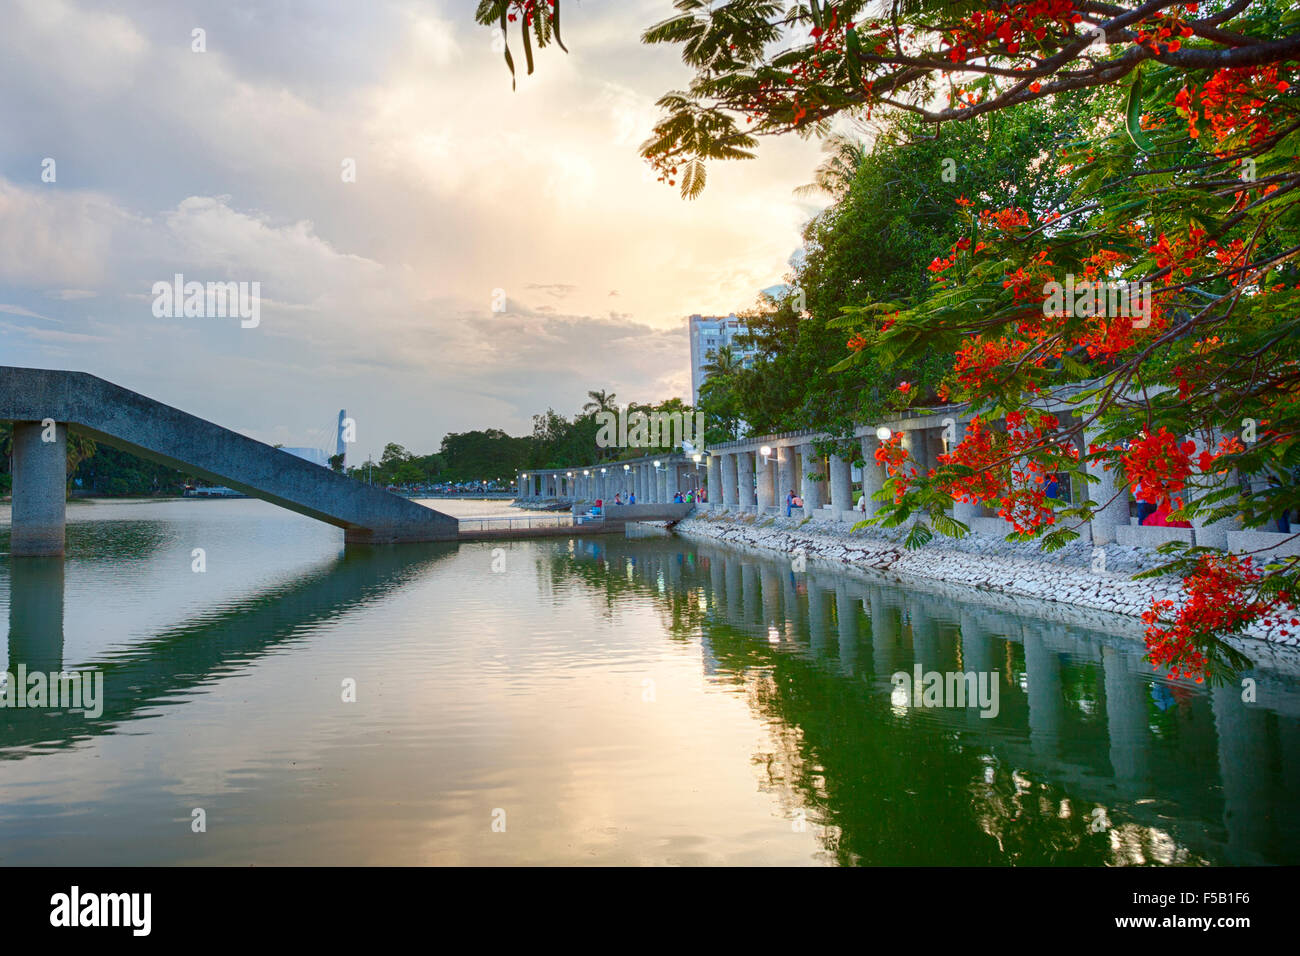 View of the Lago de Ilusiones lake and walkway at dusk in Villahermosa, Tabasco, Mexico. Stock Photo